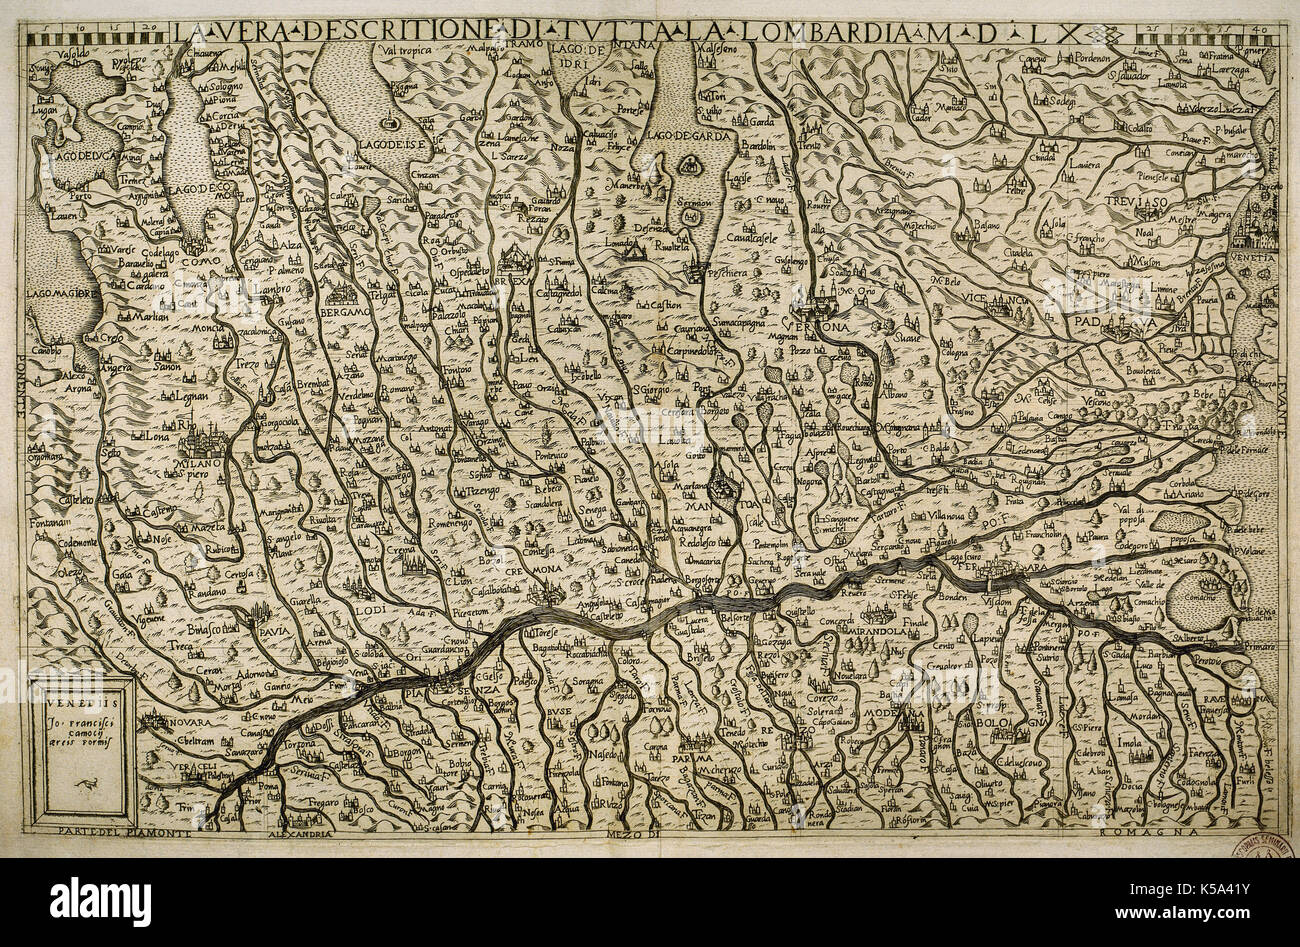 Map of the Lombardy region (Italy) with the cities of Milan, Verona, Padua, Mantua, Parma, Modena, Bologne and Venice. Italian engraving from the 16th century. Stock Photo